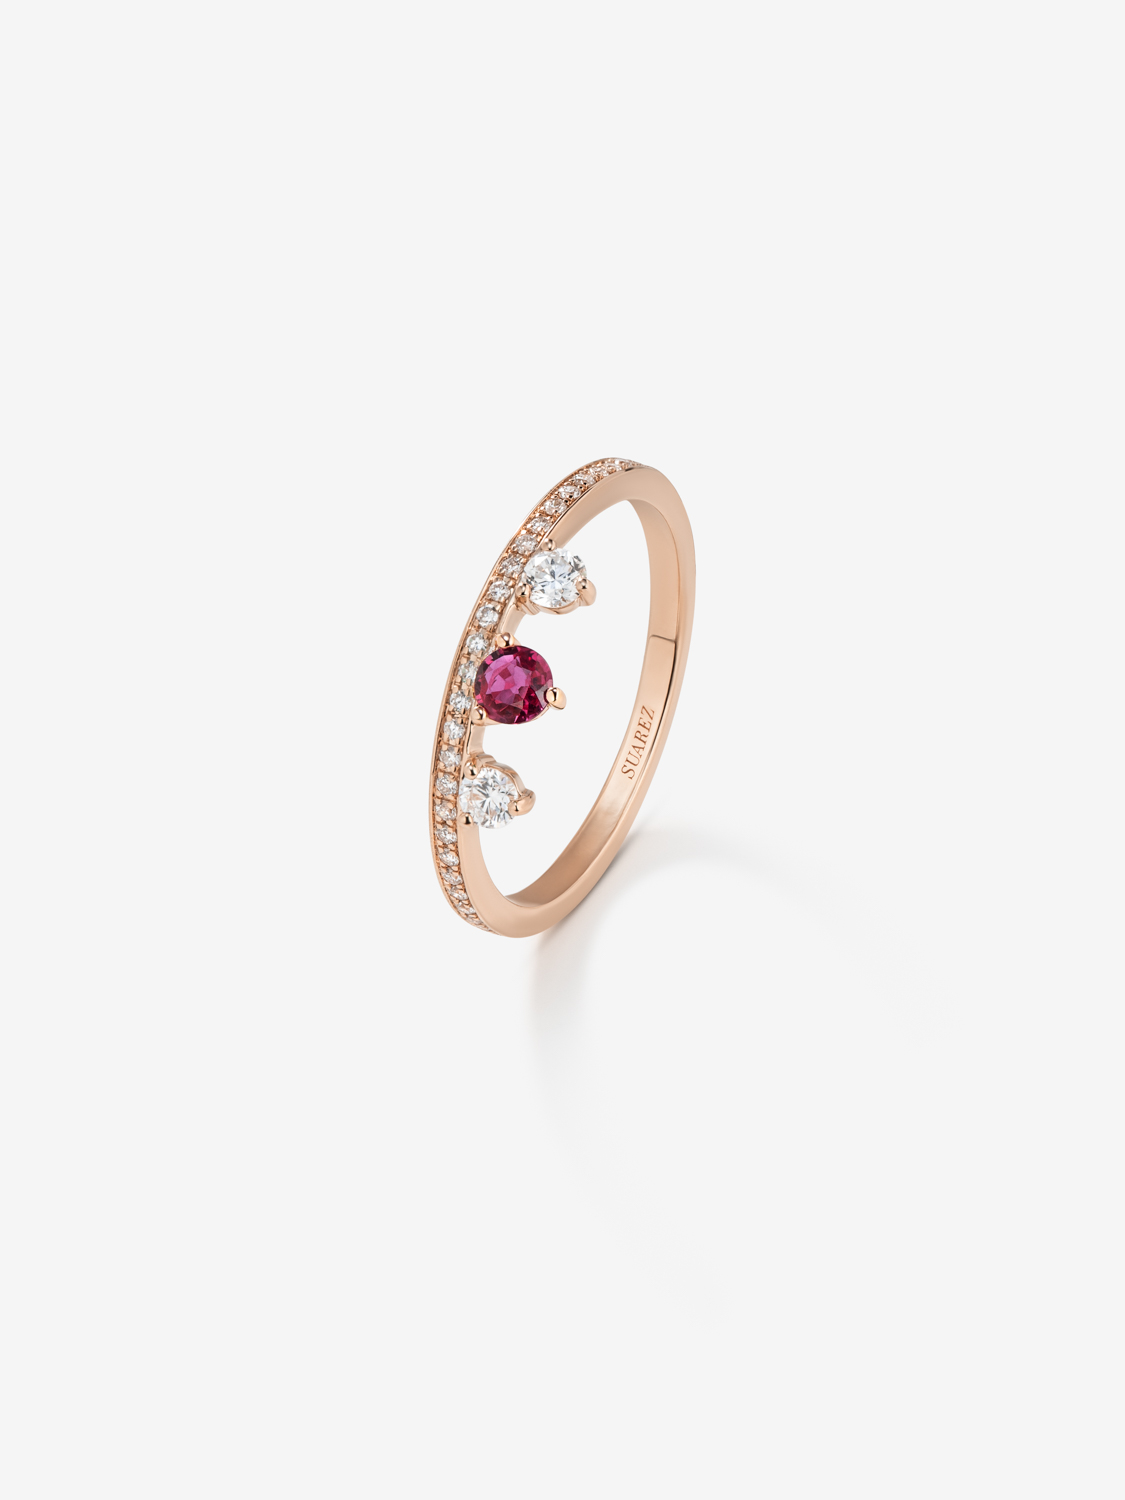 18K Rose Gold Ring with Ruby and Diamonds